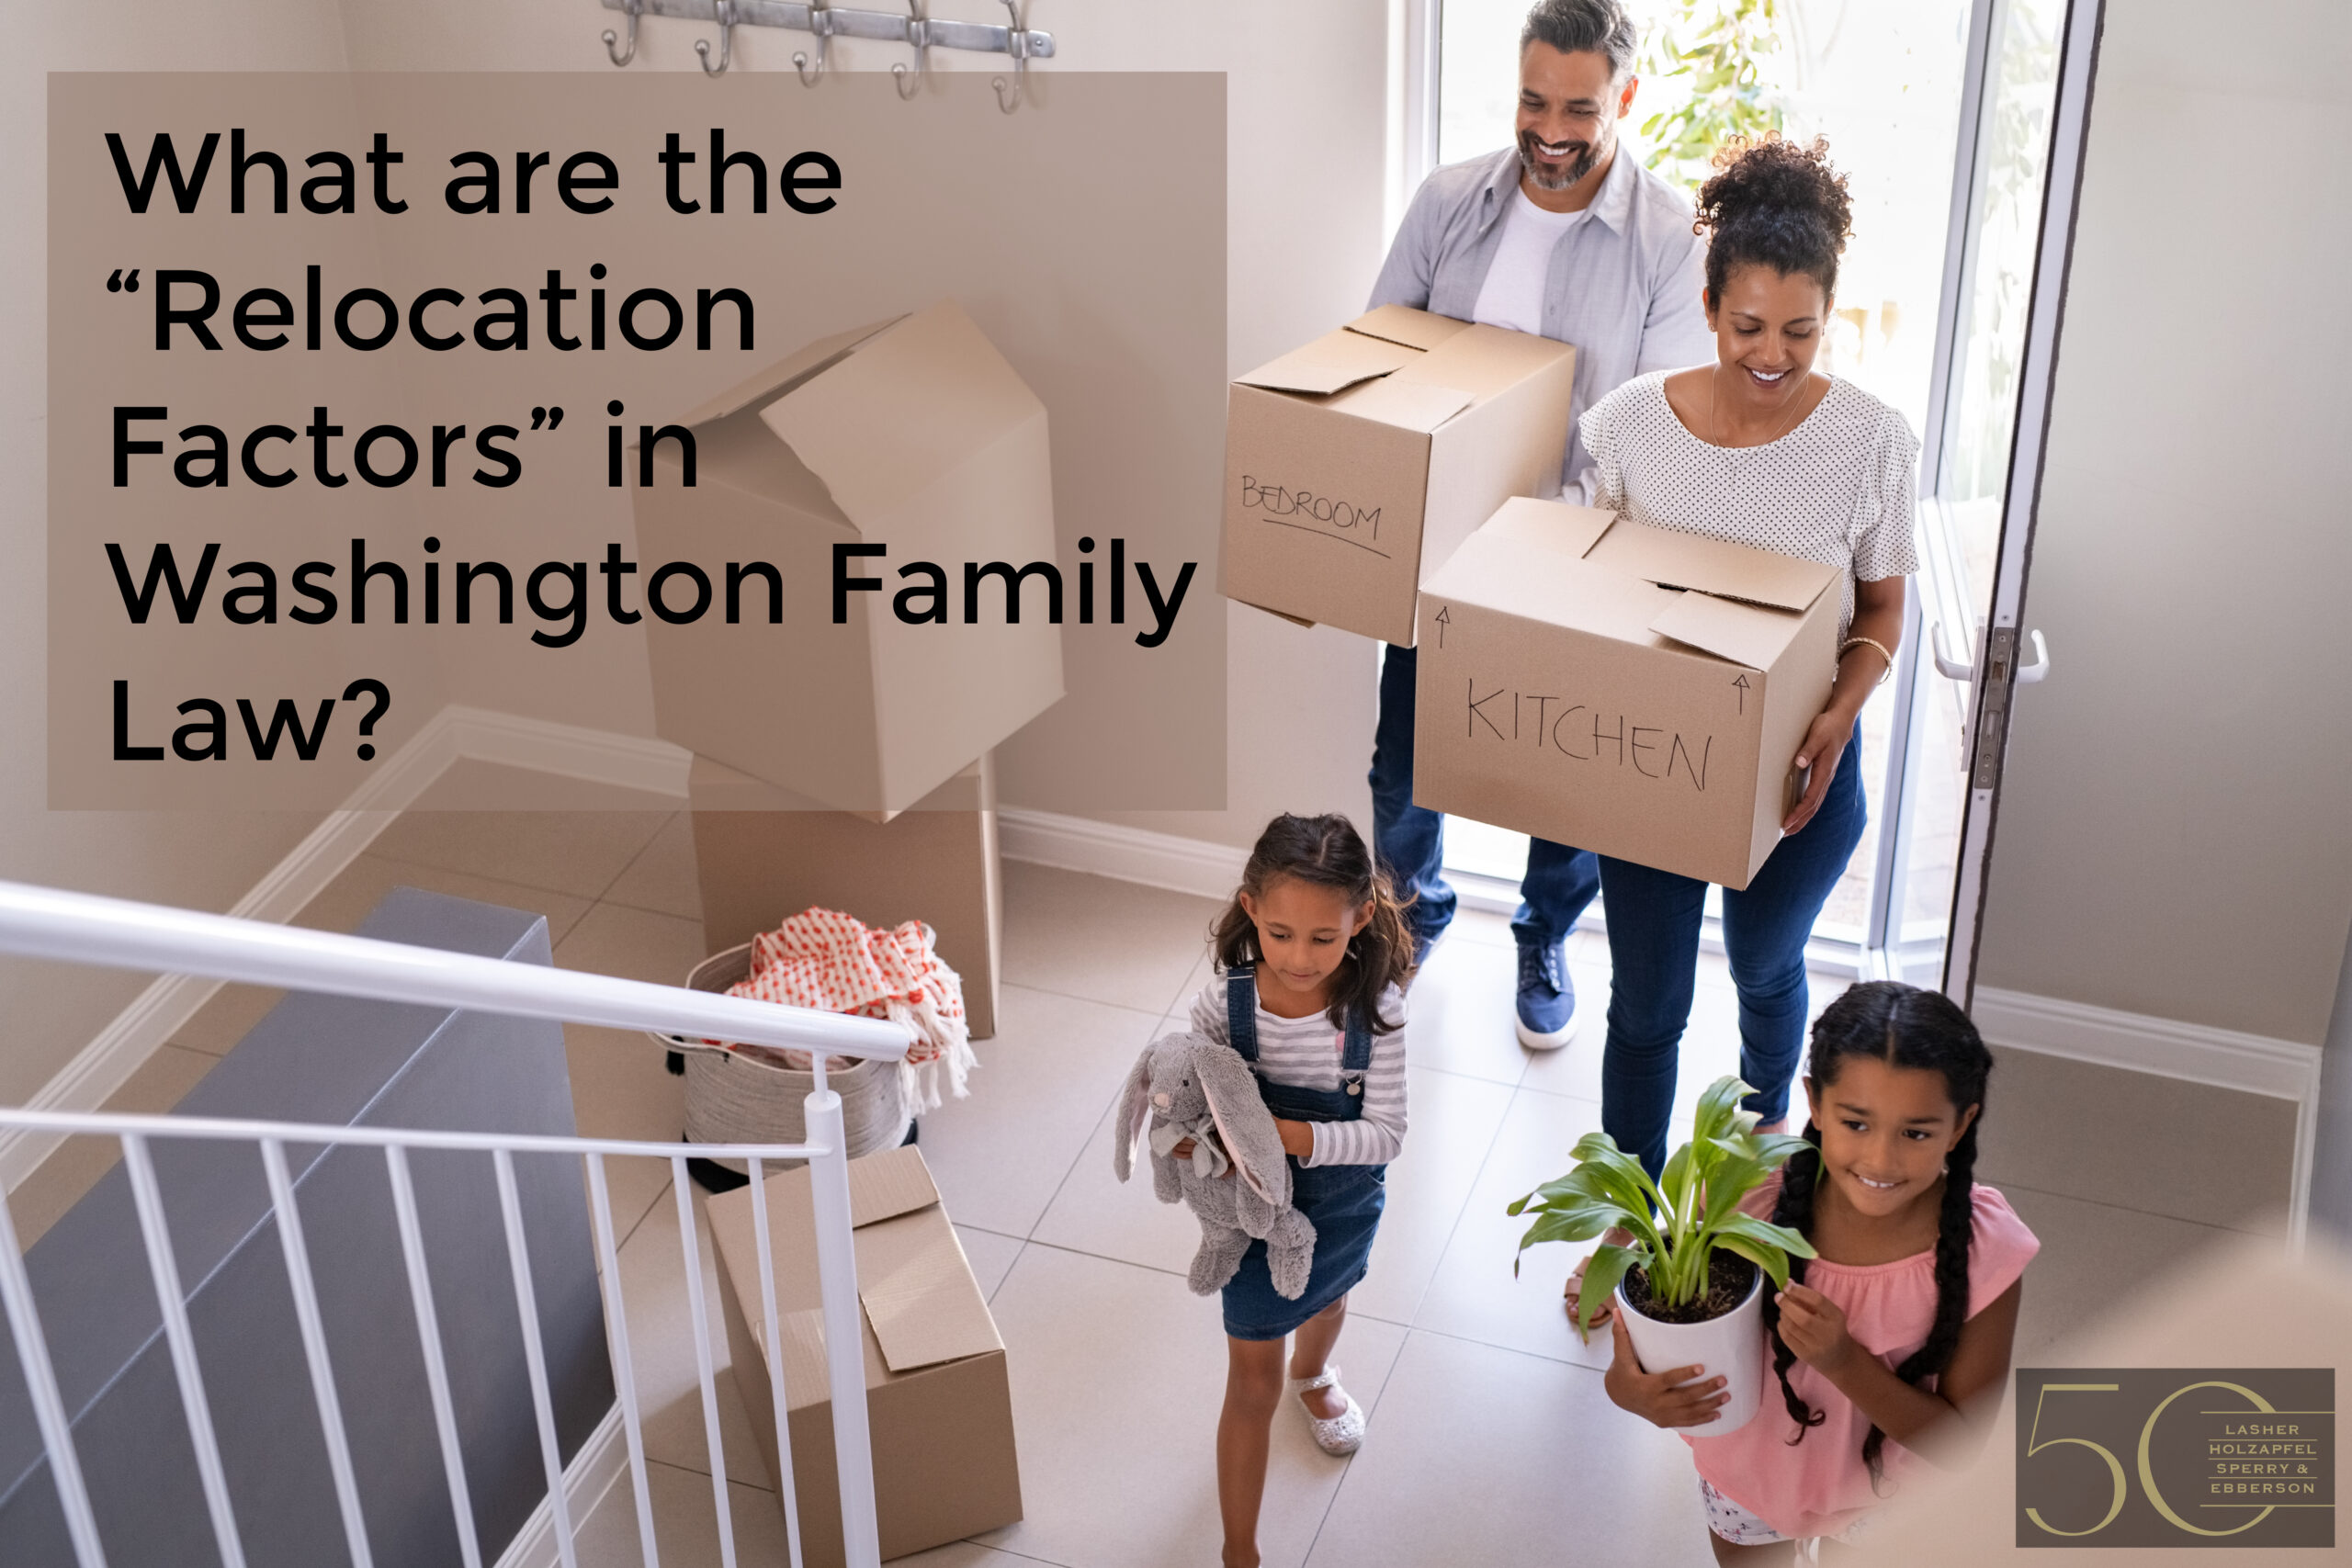 What are the “Relocation Factors” in Washington Family Law?